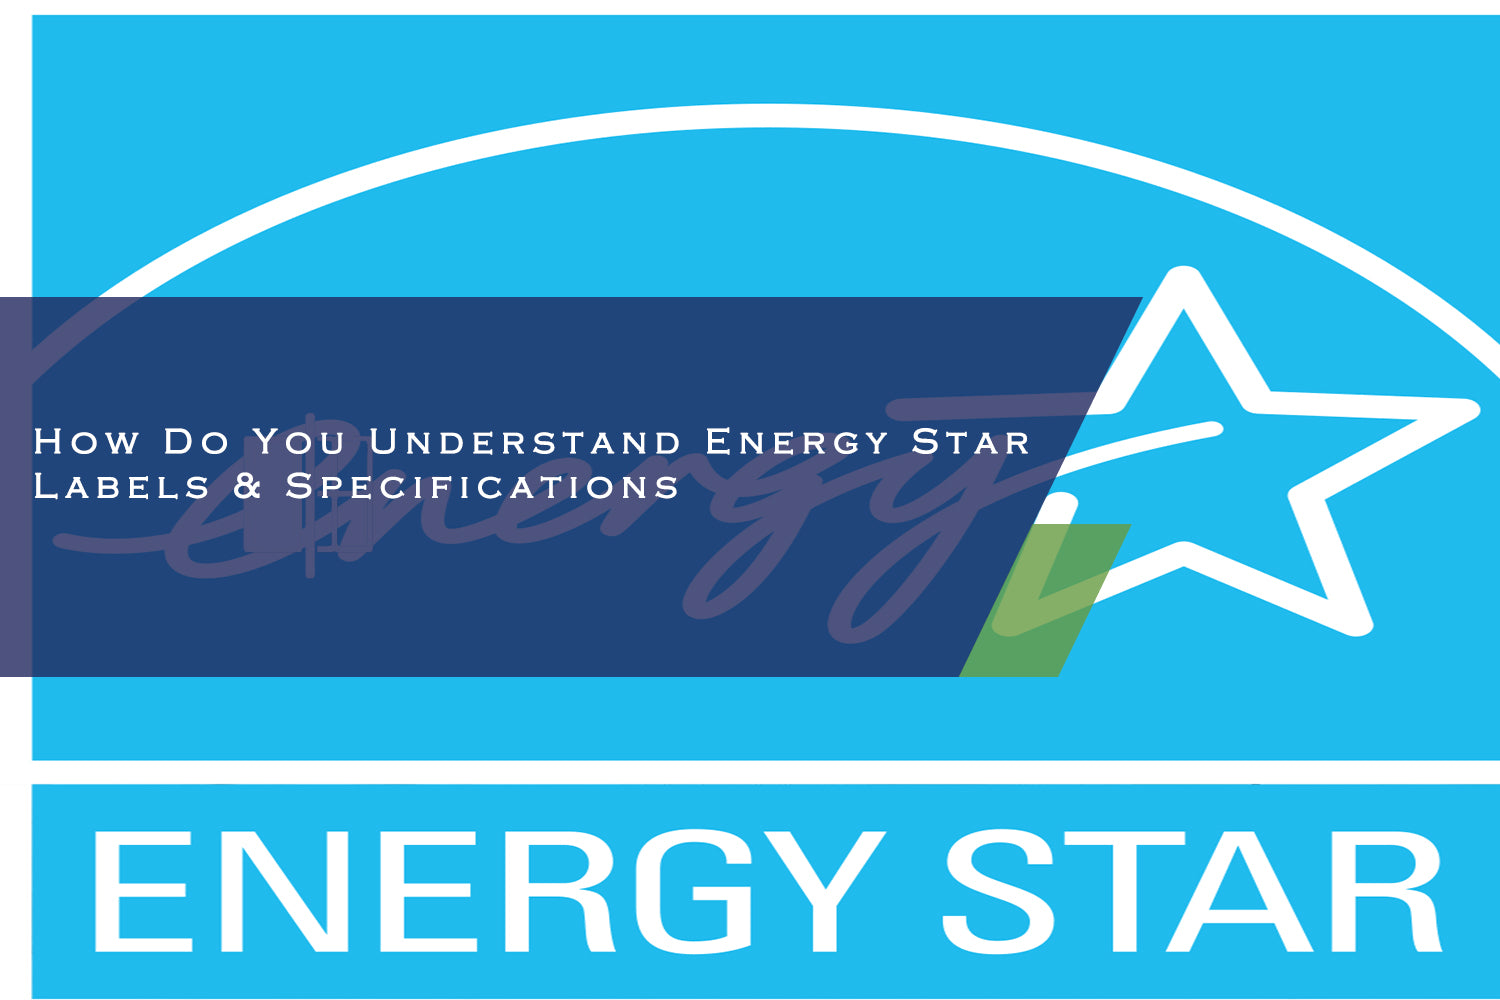 How Do You Understand Energy Star Labels & Specifications